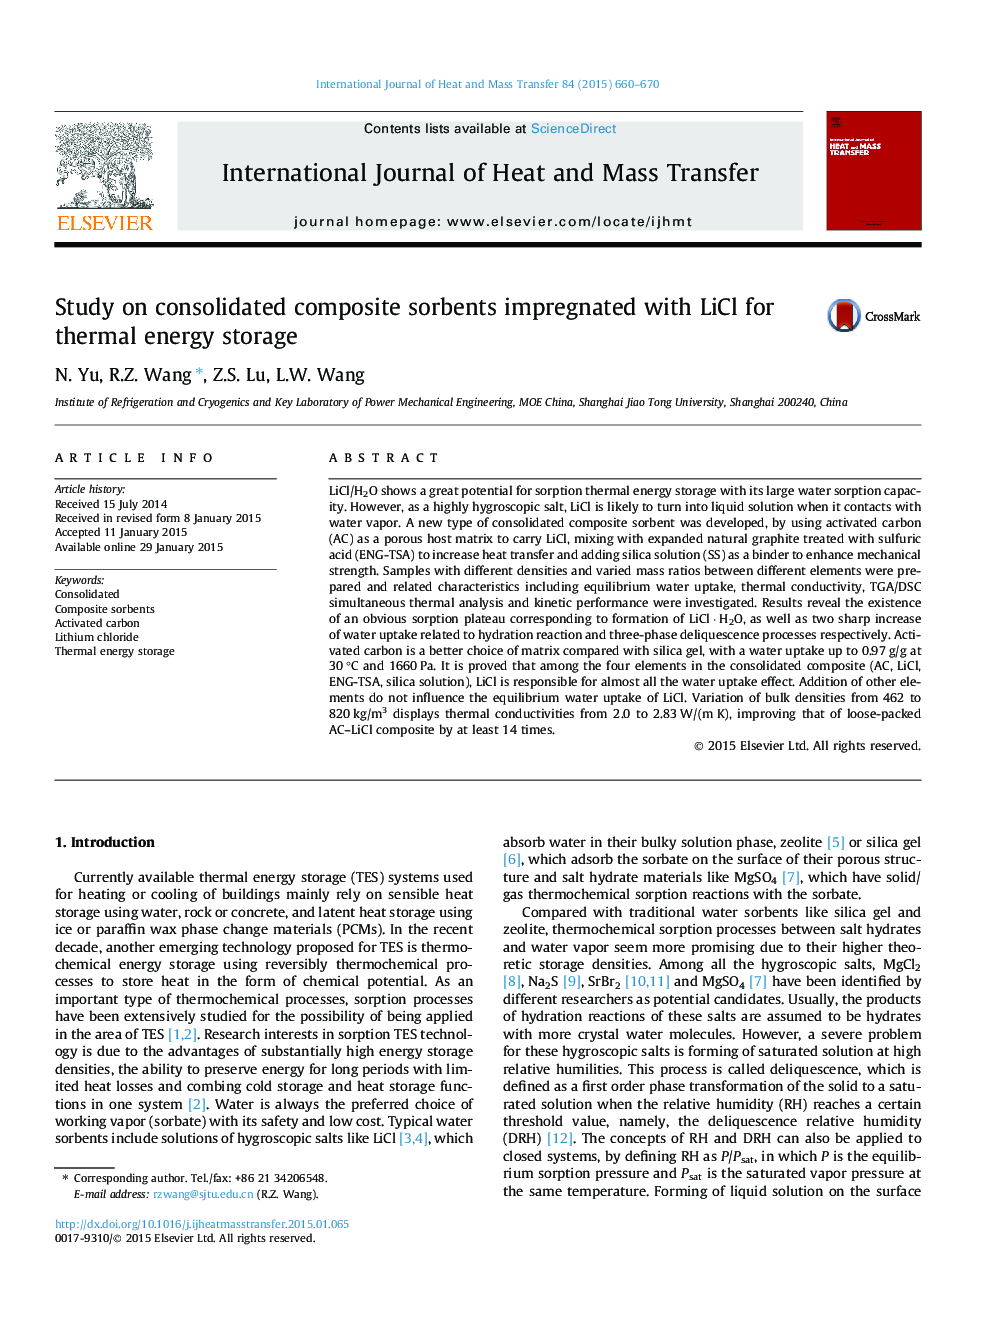 Study on consolidated composite sorbents impregnated with LiCl for thermal energy storage